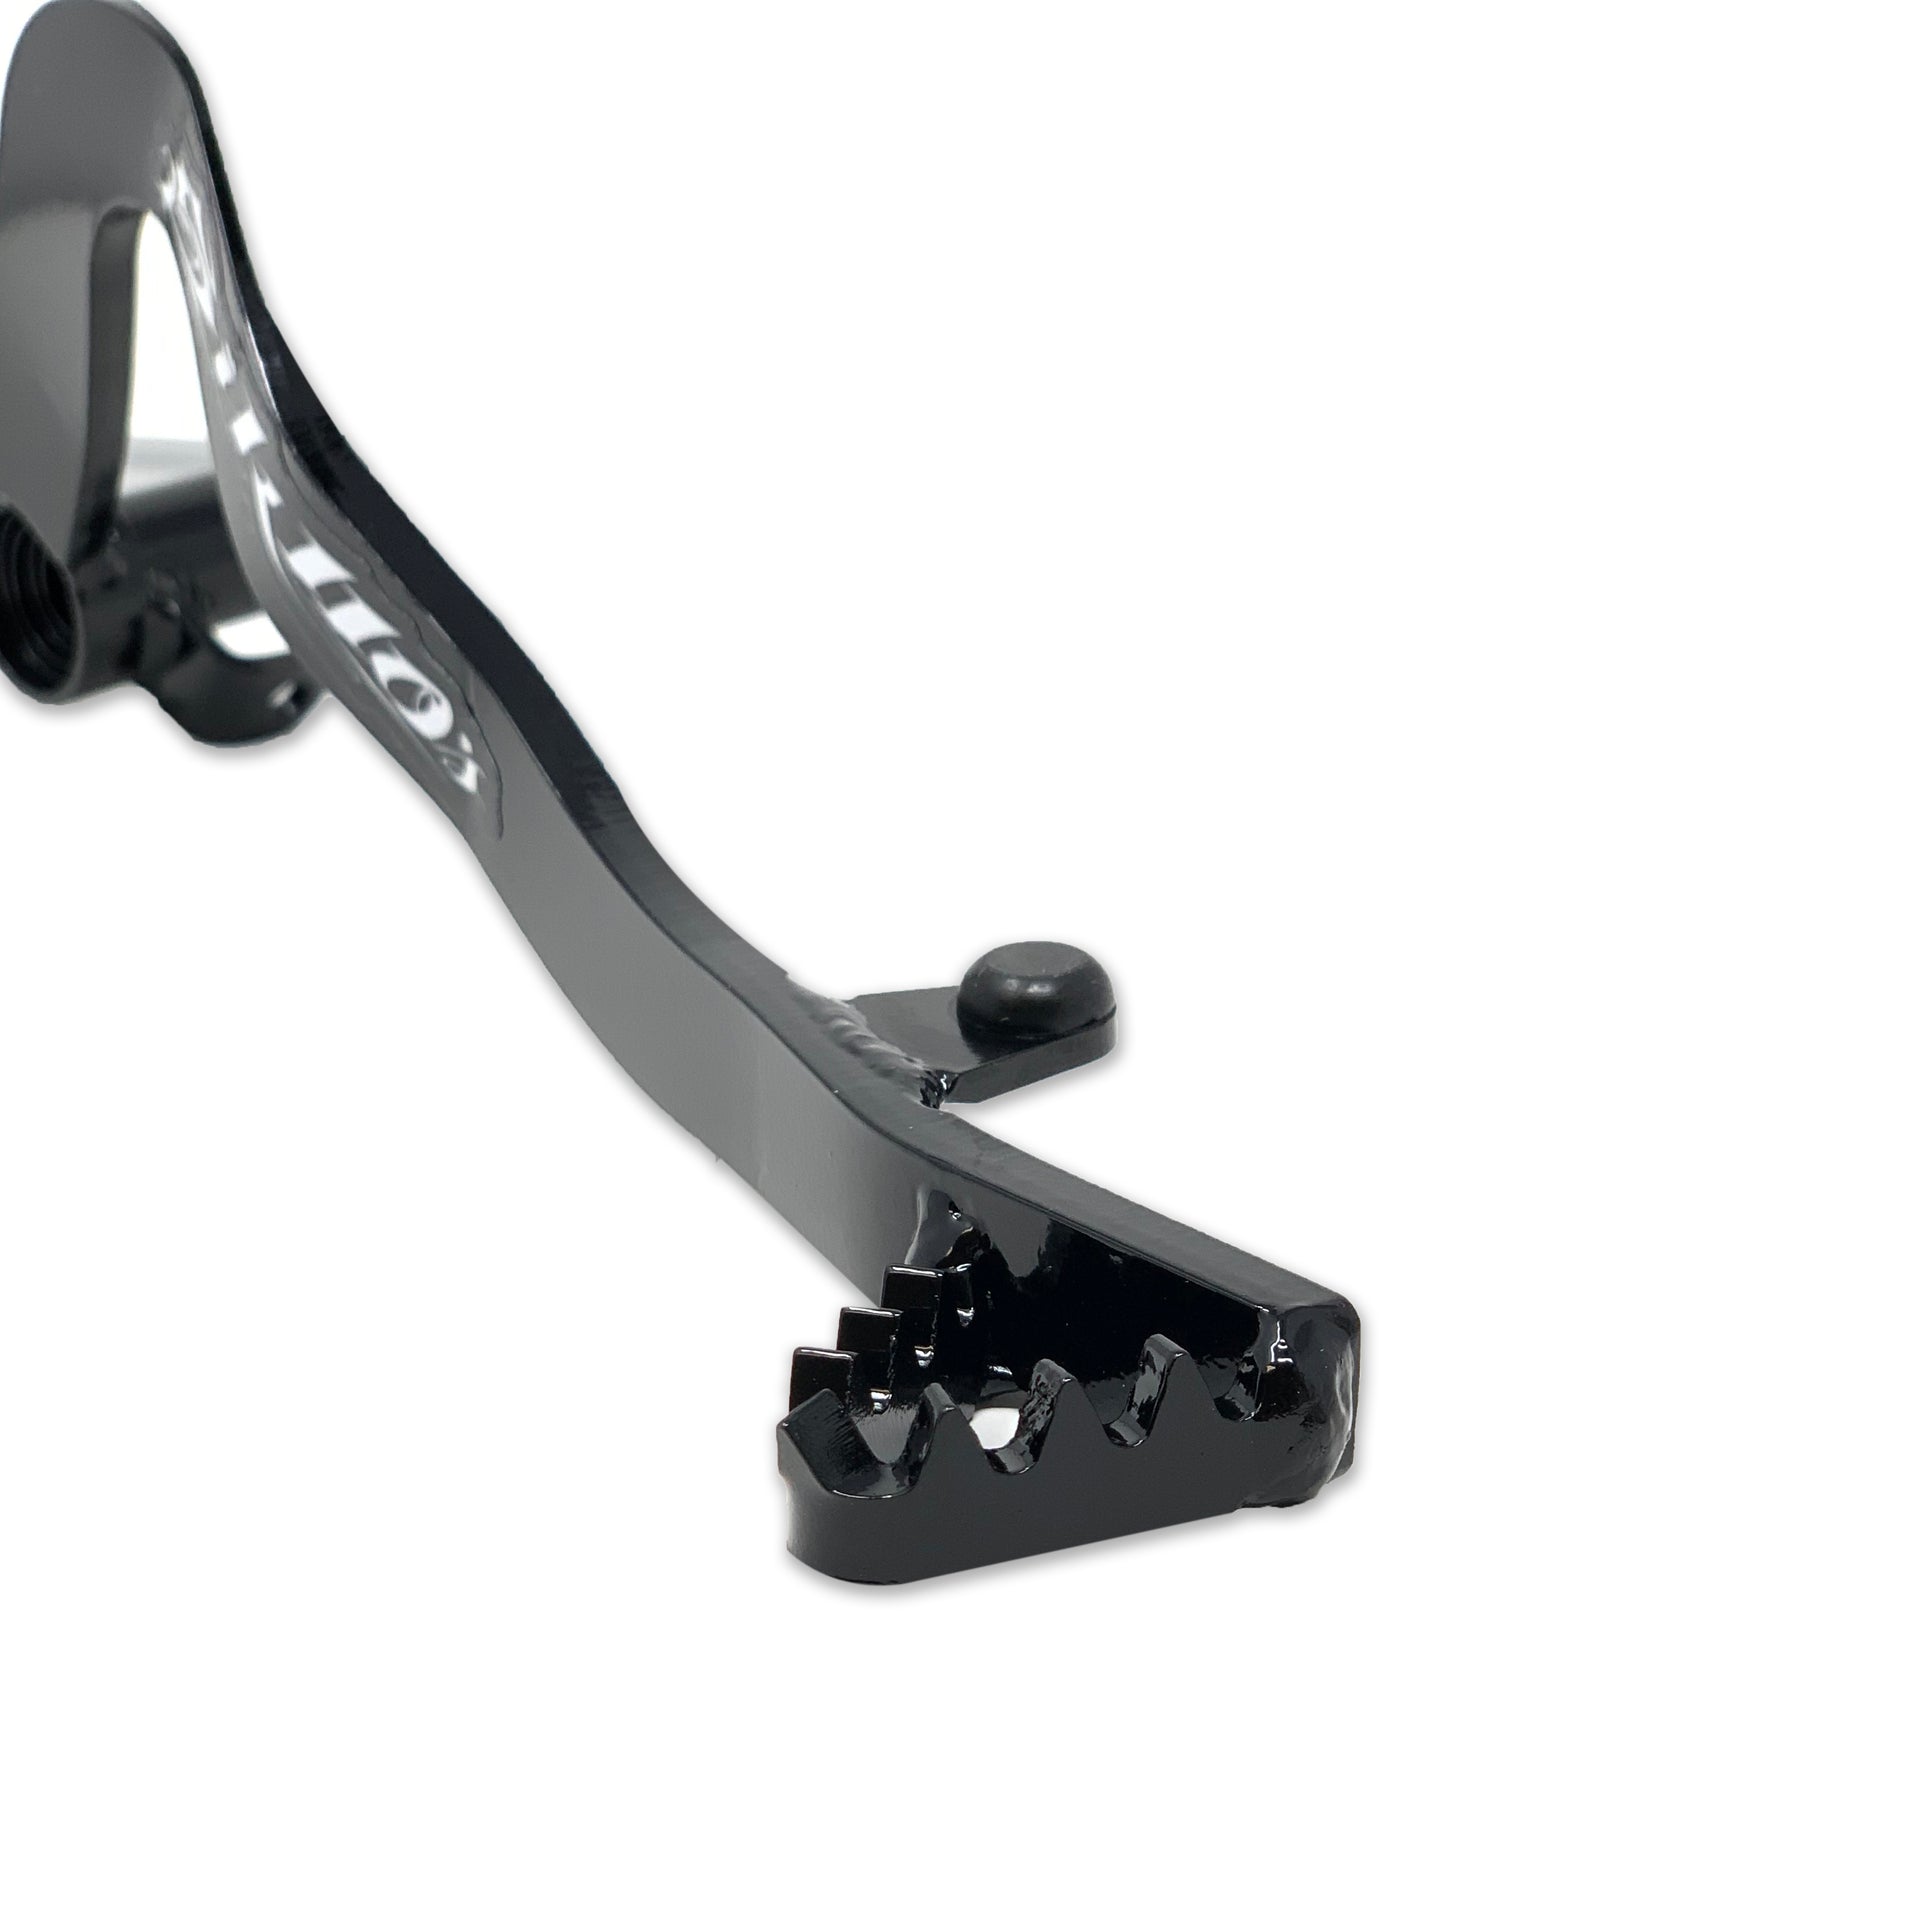 Sik110s Over-The-Top Brake Pedal